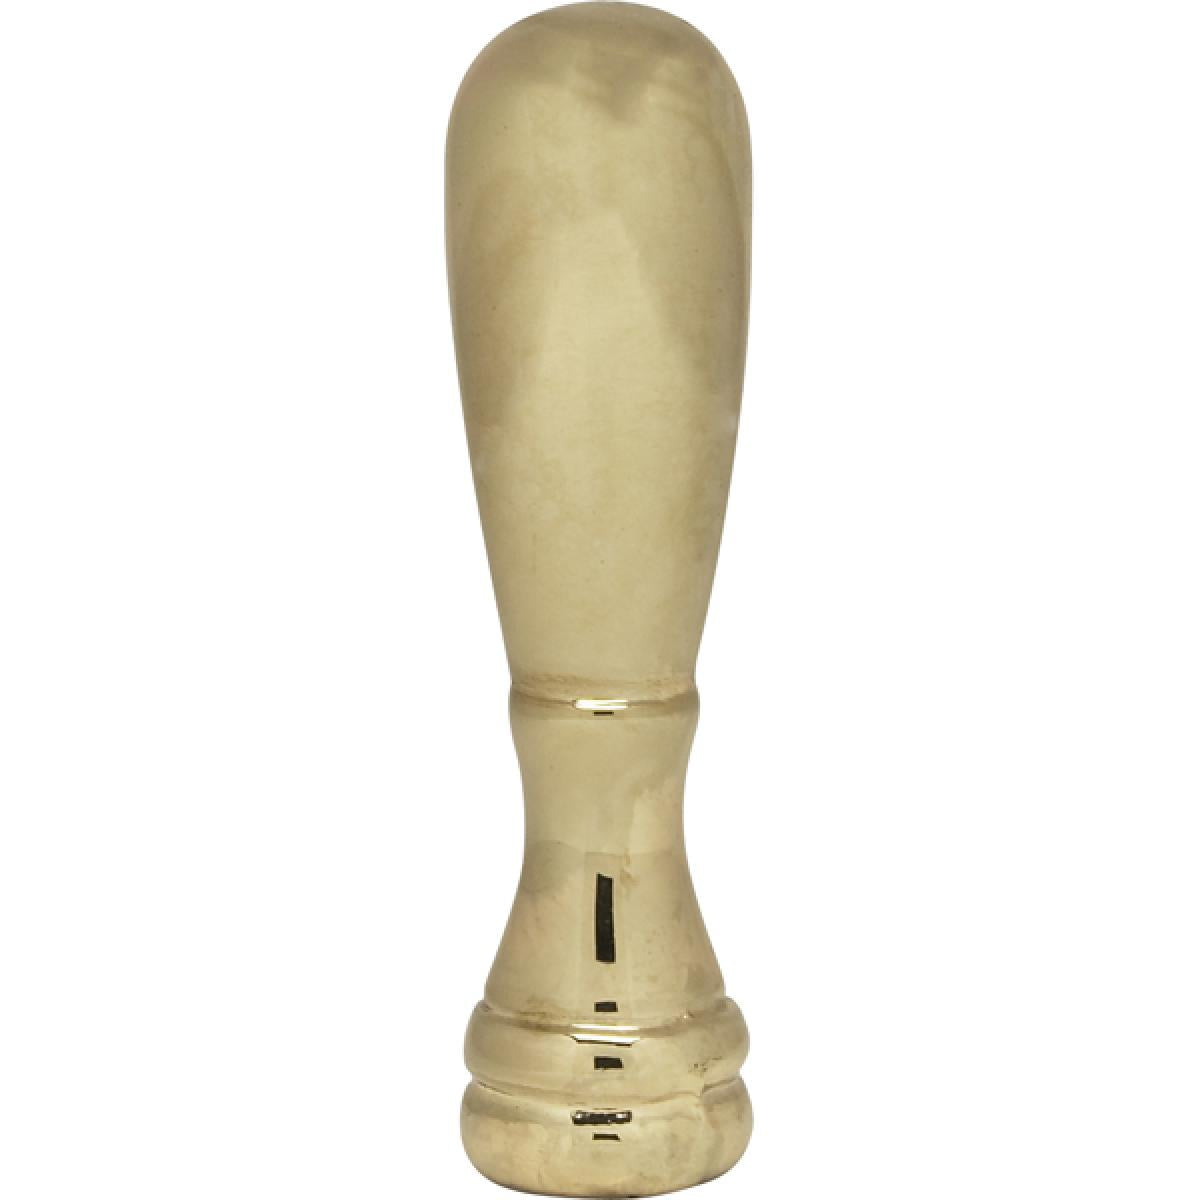 Satco 90-1717 Bullet Finial 2" Height 1/4-27 Polished Brass Finish